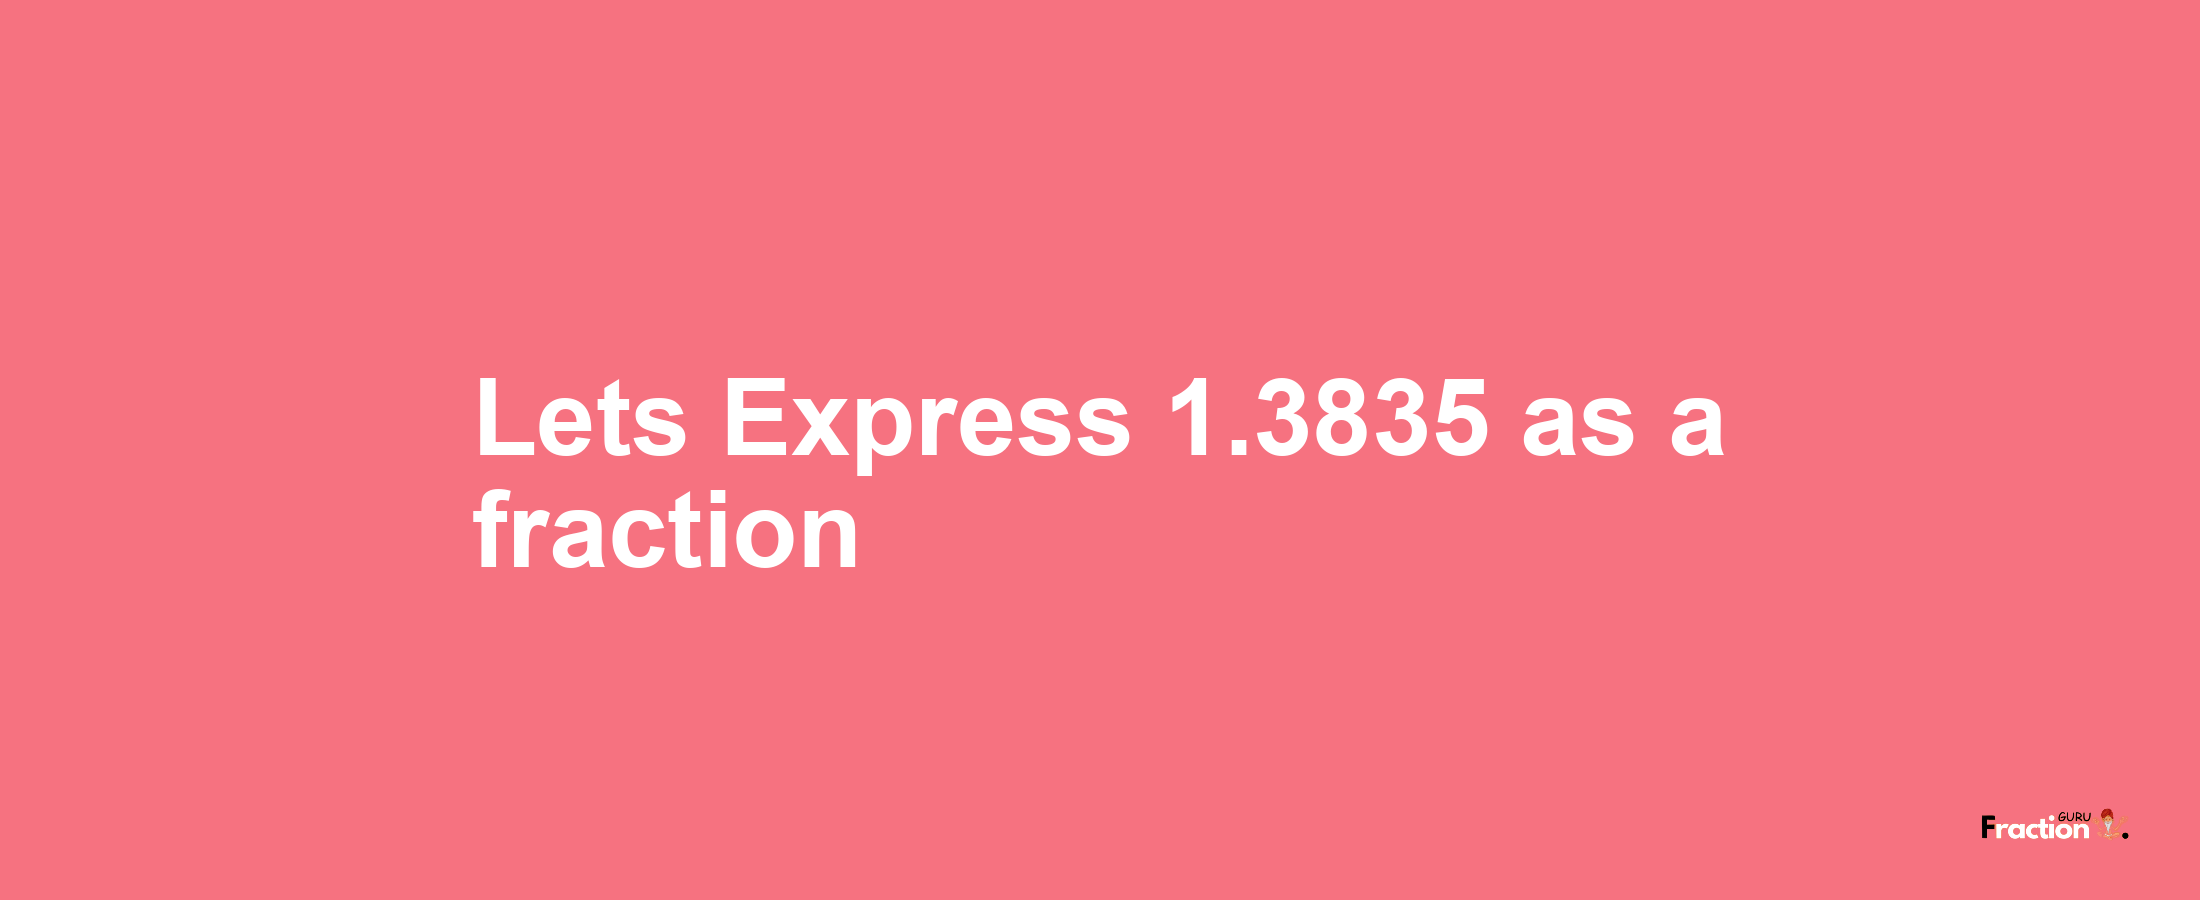 Lets Express 1.3835 as afraction